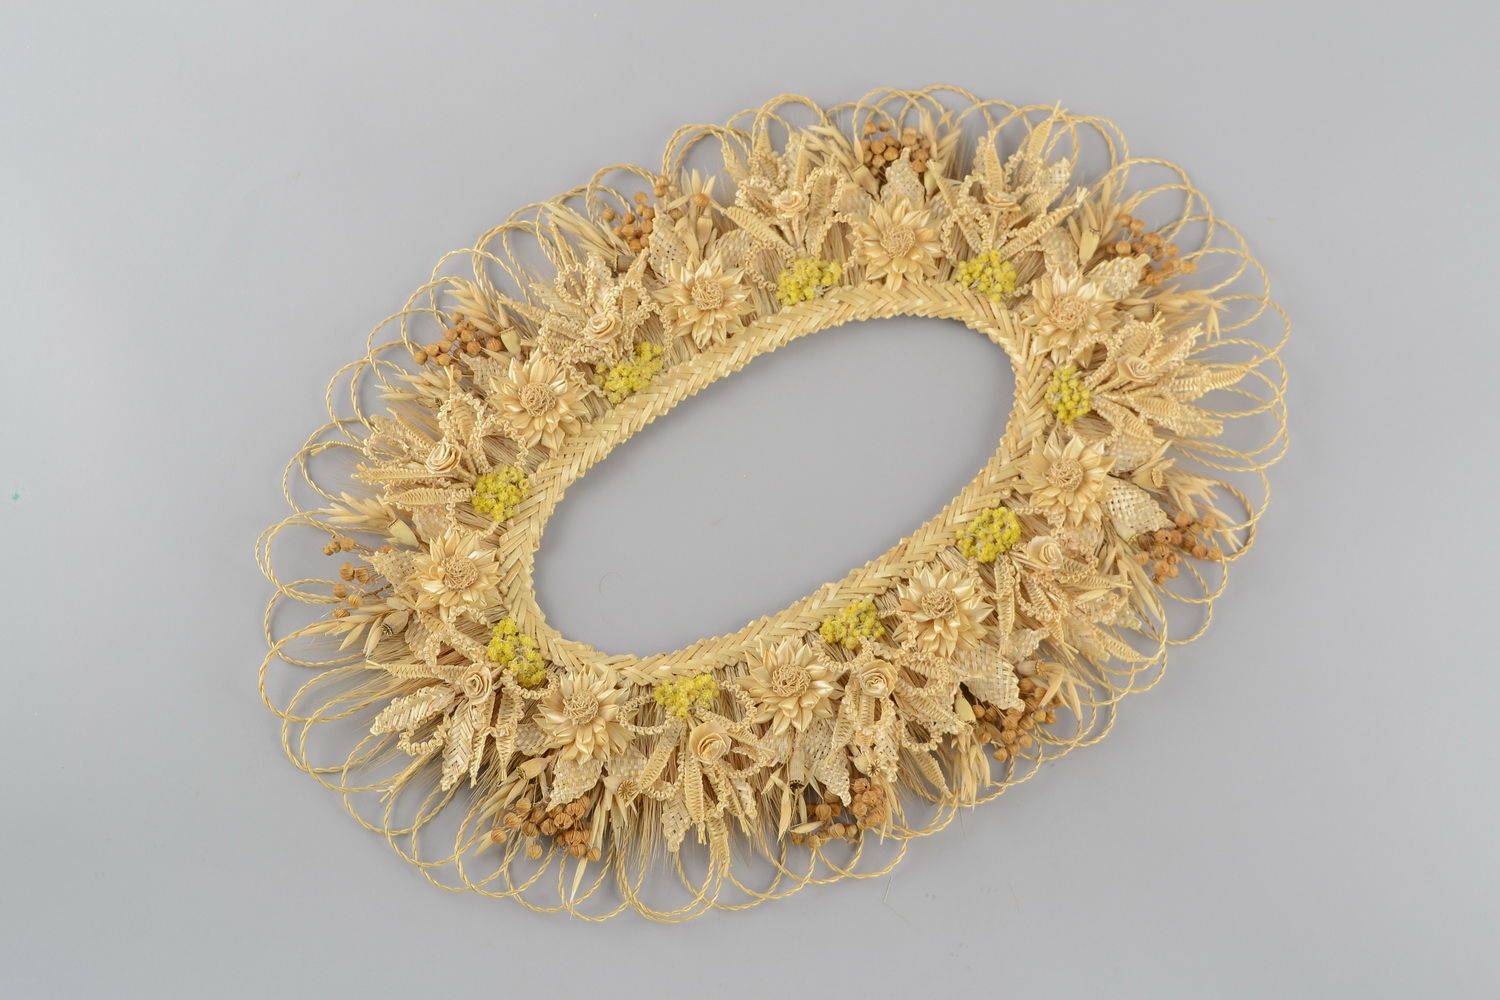 Oval family amulet made of straw photo 1